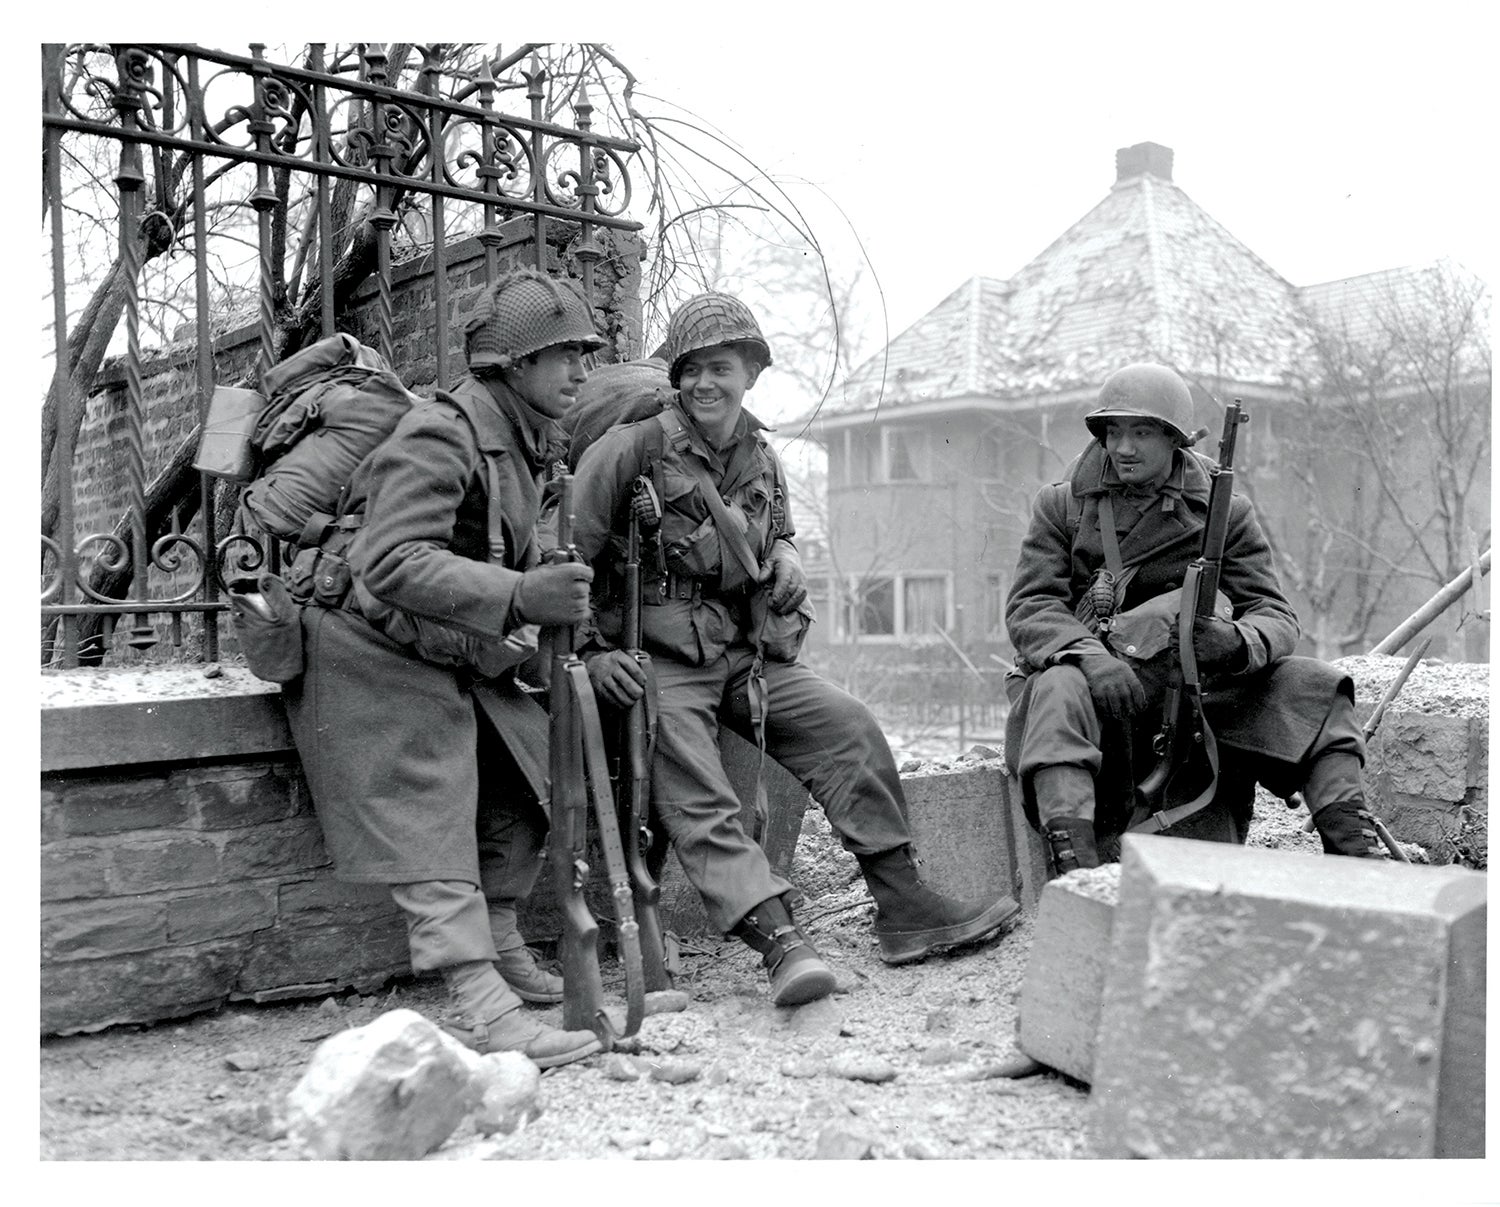 Soldiers take a break near Malmedy, Belgium. (Credit: National Archives)